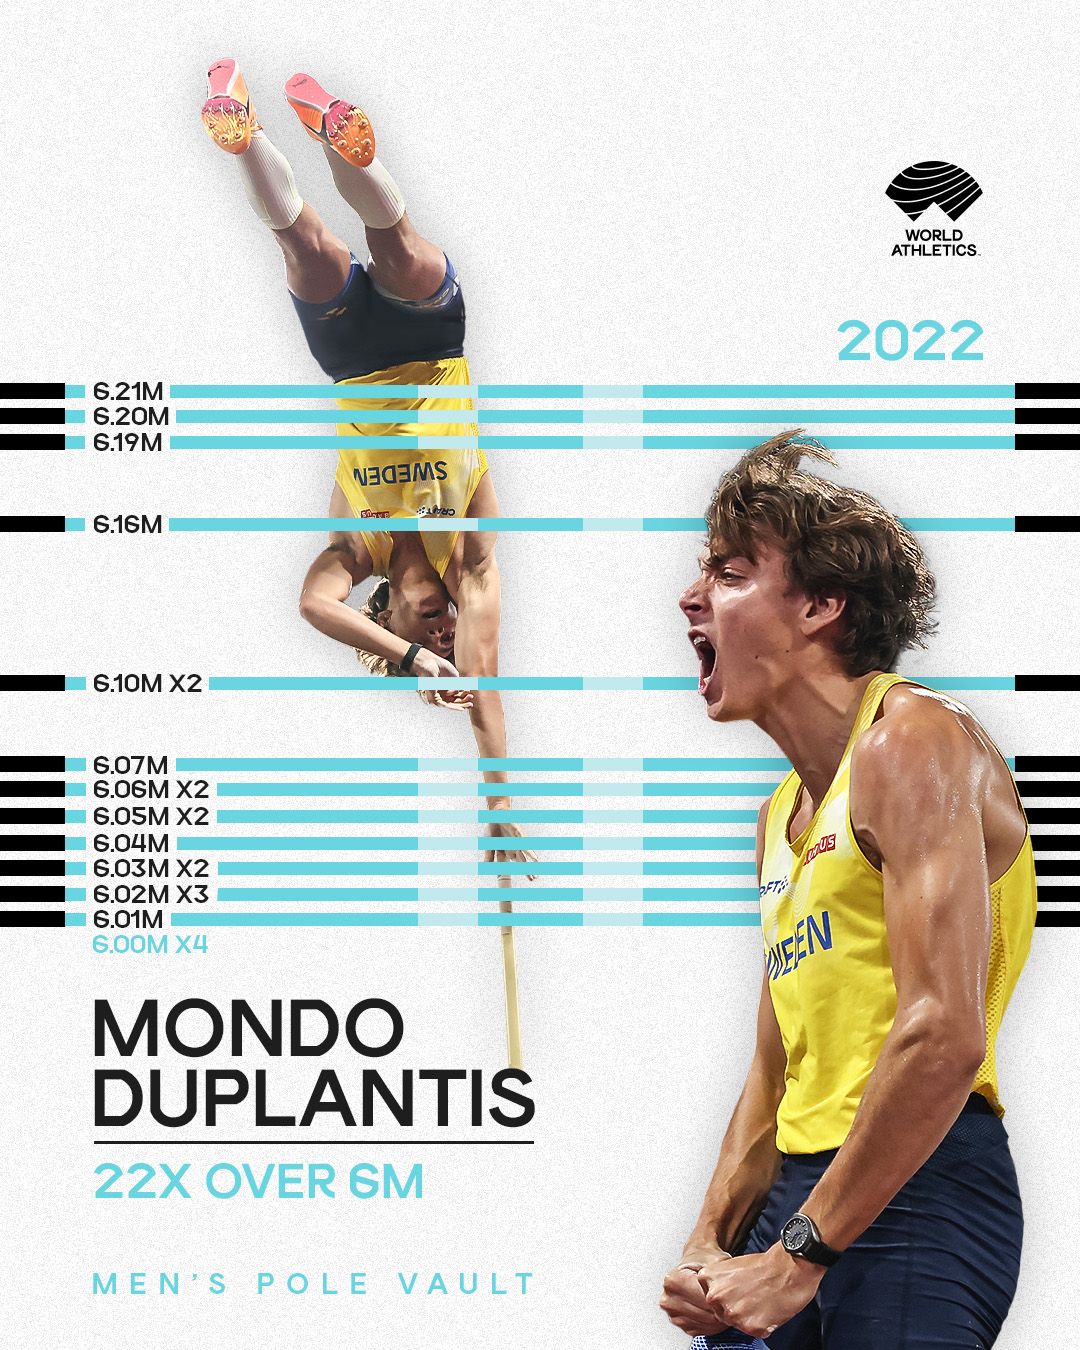 Mondo Duplantis and his six metre clearances in 2022